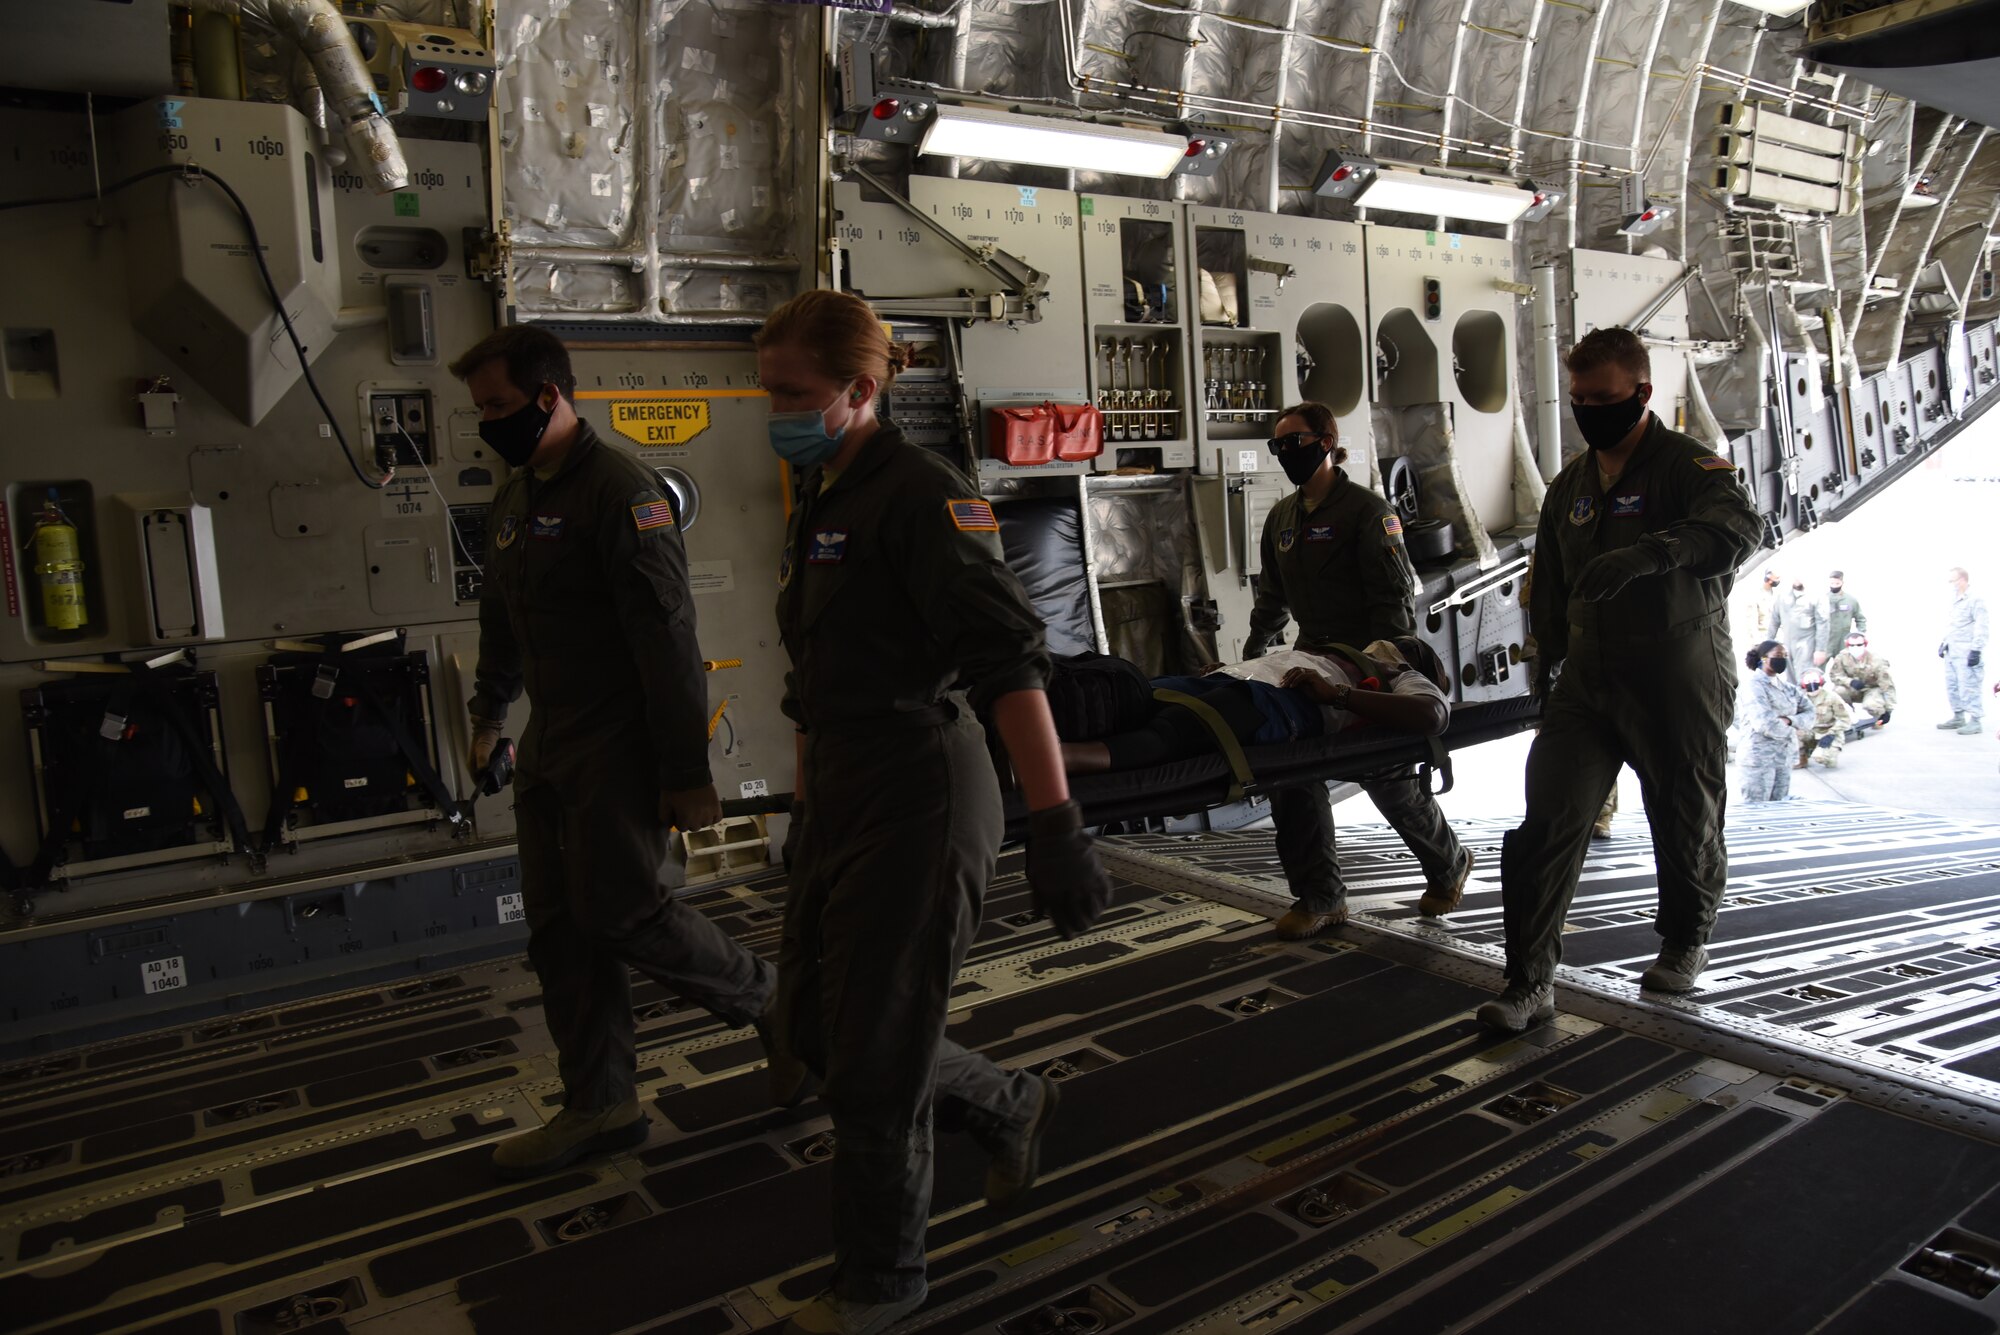 Reserve Citizen Airmen from the 36th Aeromedical Evacuation Squadron and Mississippi Air National Guardsmen from the 183rd AES work together loading patients into a C-17 Globemaster III during a three-day training event, July 20-22, 2020 at Keesler Air Force Base and the Mississippi Air National Guard's Combat Readiness Training Center in Gulfport, Mississippi. The training was a joint effort between Reservists and Guardsmen to work as one team, while training on patient care and handling during a simulated air evacuation of injured service members. (U.S. Air Force photo by Jessica L. Kendziorek)